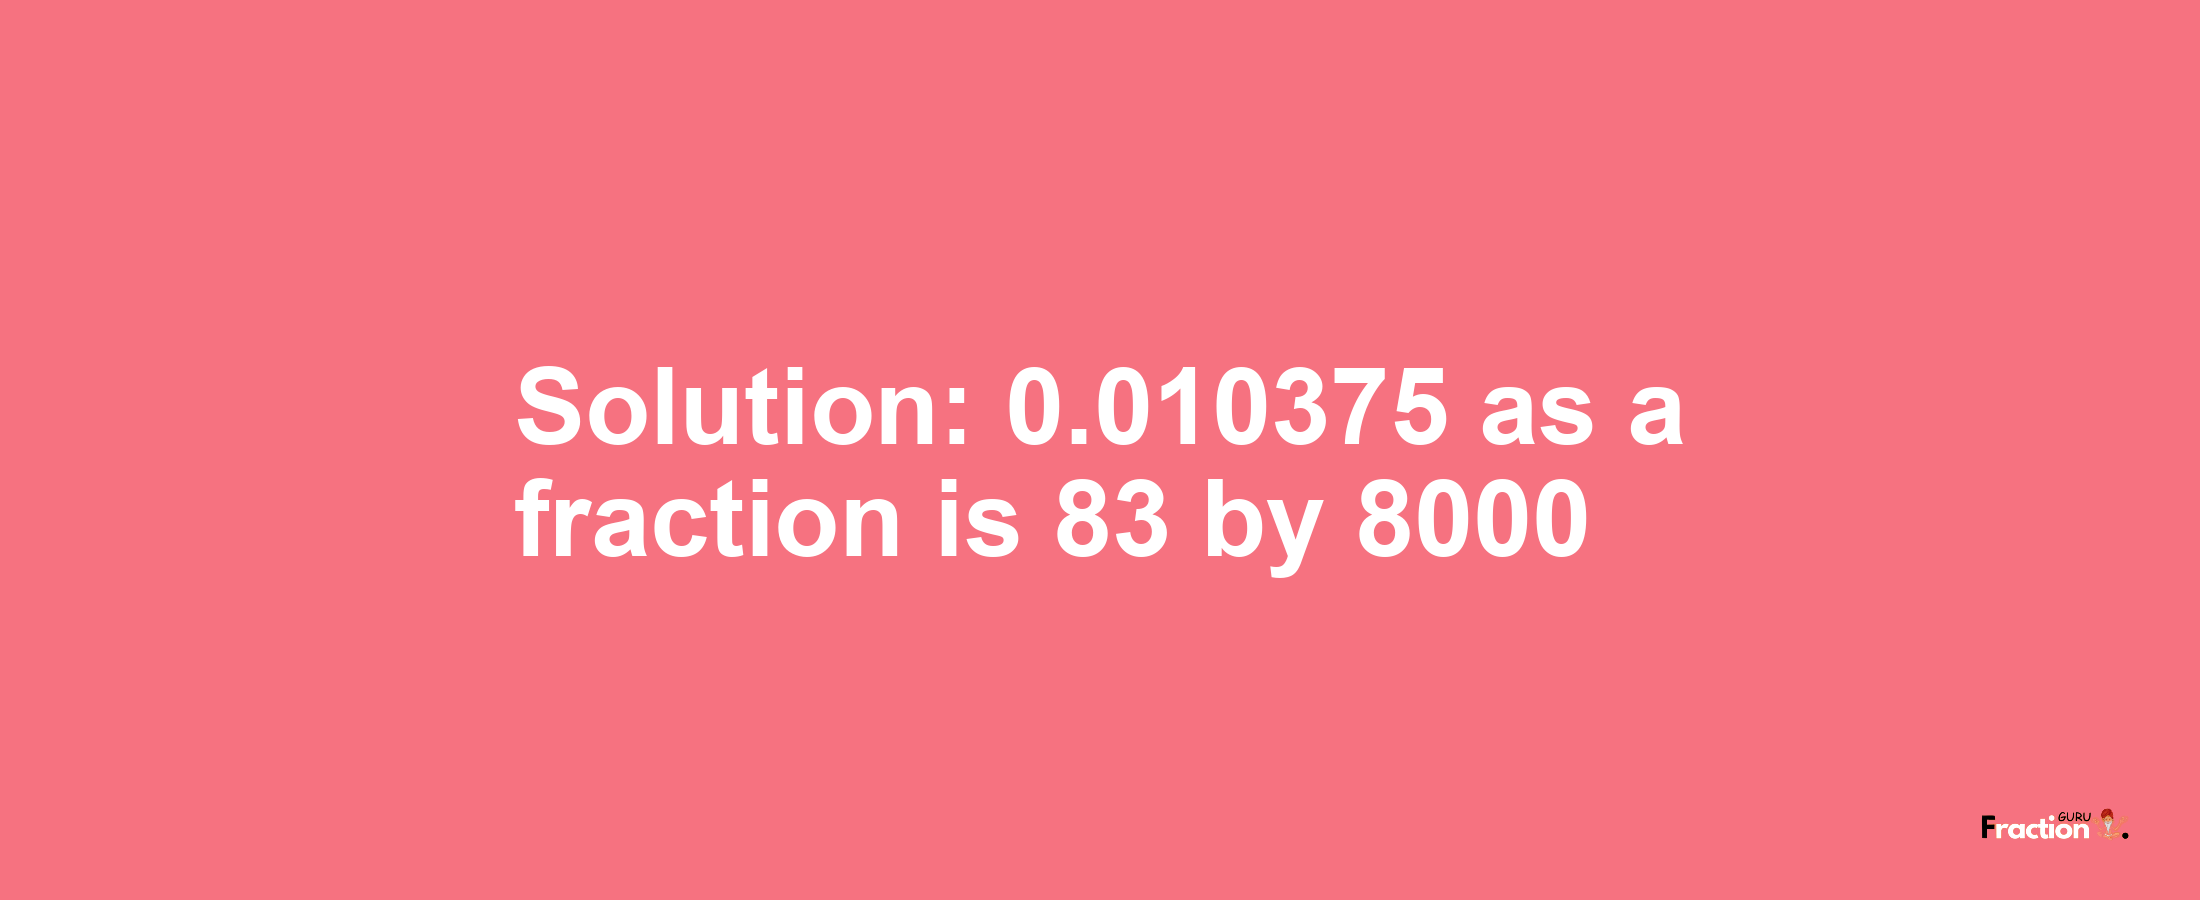 Solution:0.010375 as a fraction is 83/8000